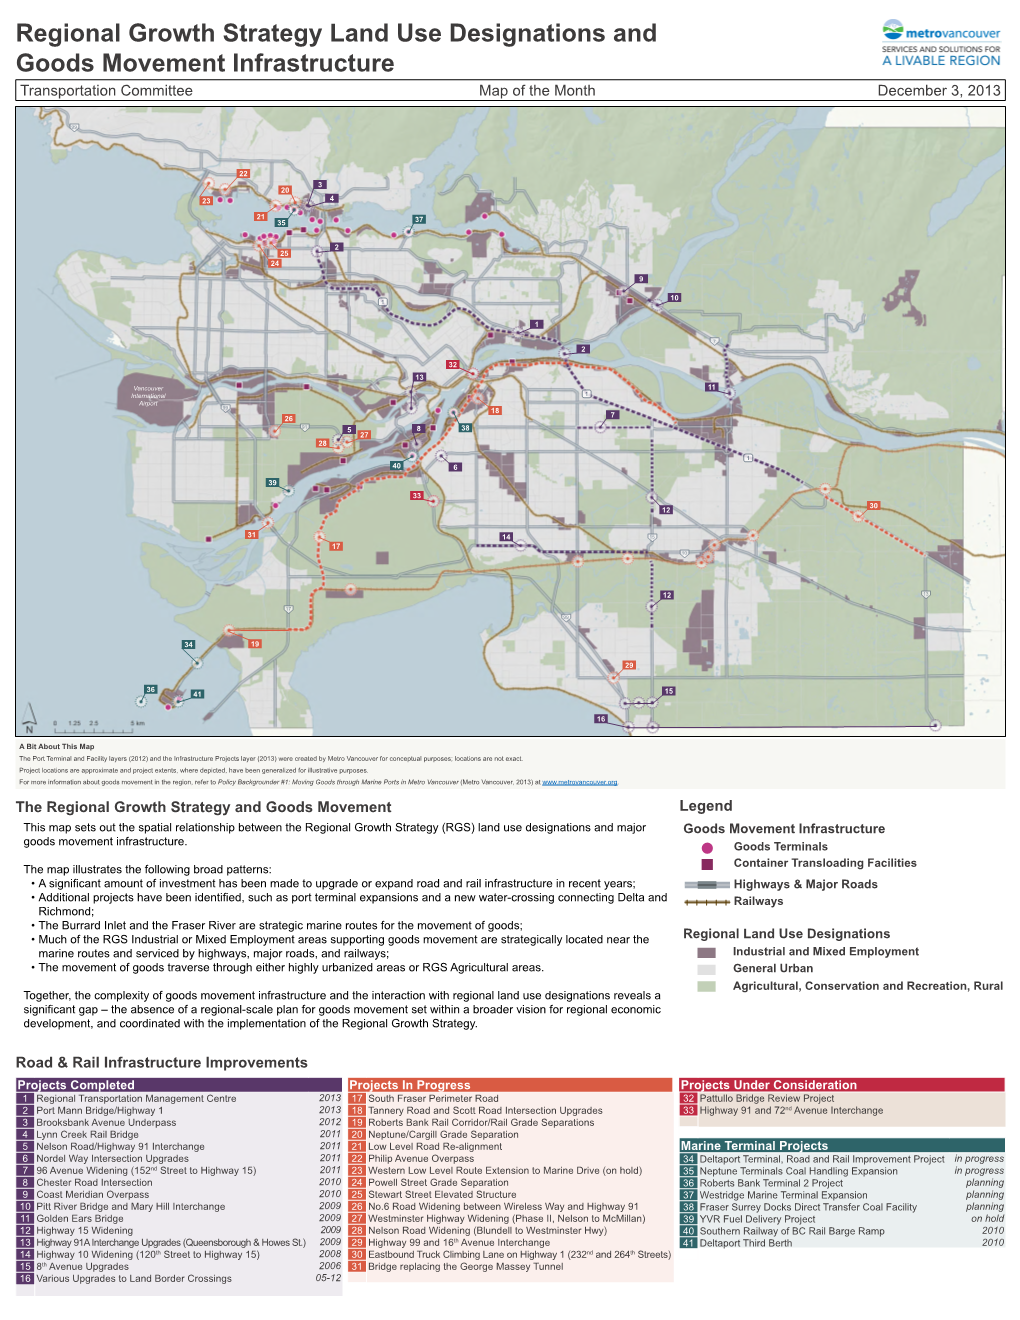 Regional Growth Strategy Land Use Designations and Goods Movement Infrastructure Transportation Committee Map of the Month December 3, 2013